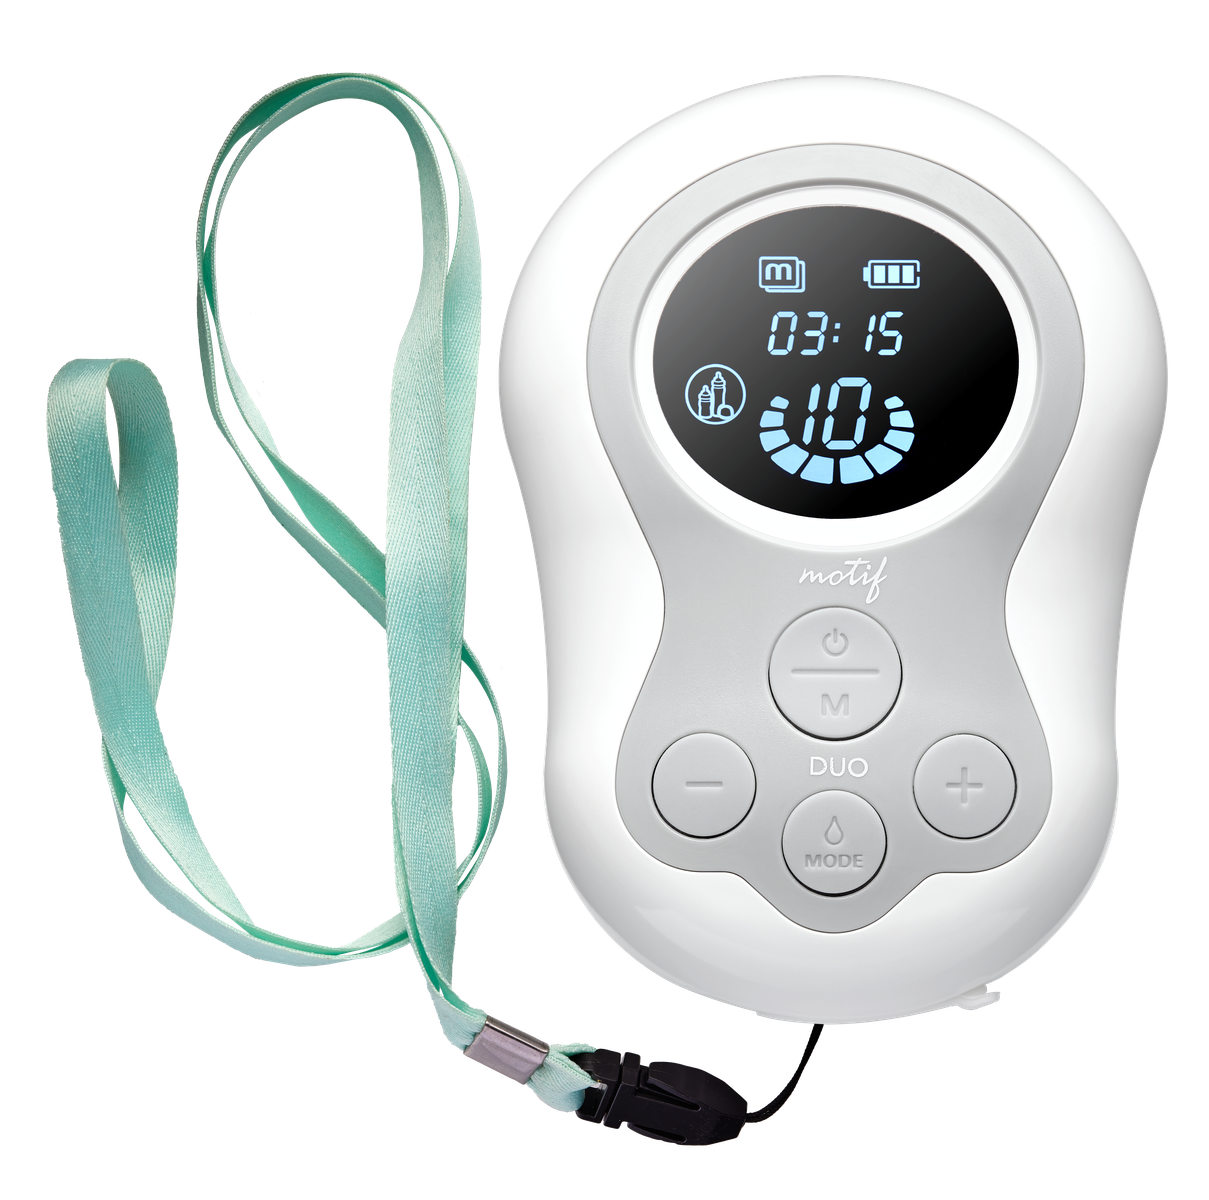 Motif Medical Duo Double Electric Breast Pump handheld unit close up showing digital display and mint green lanyard